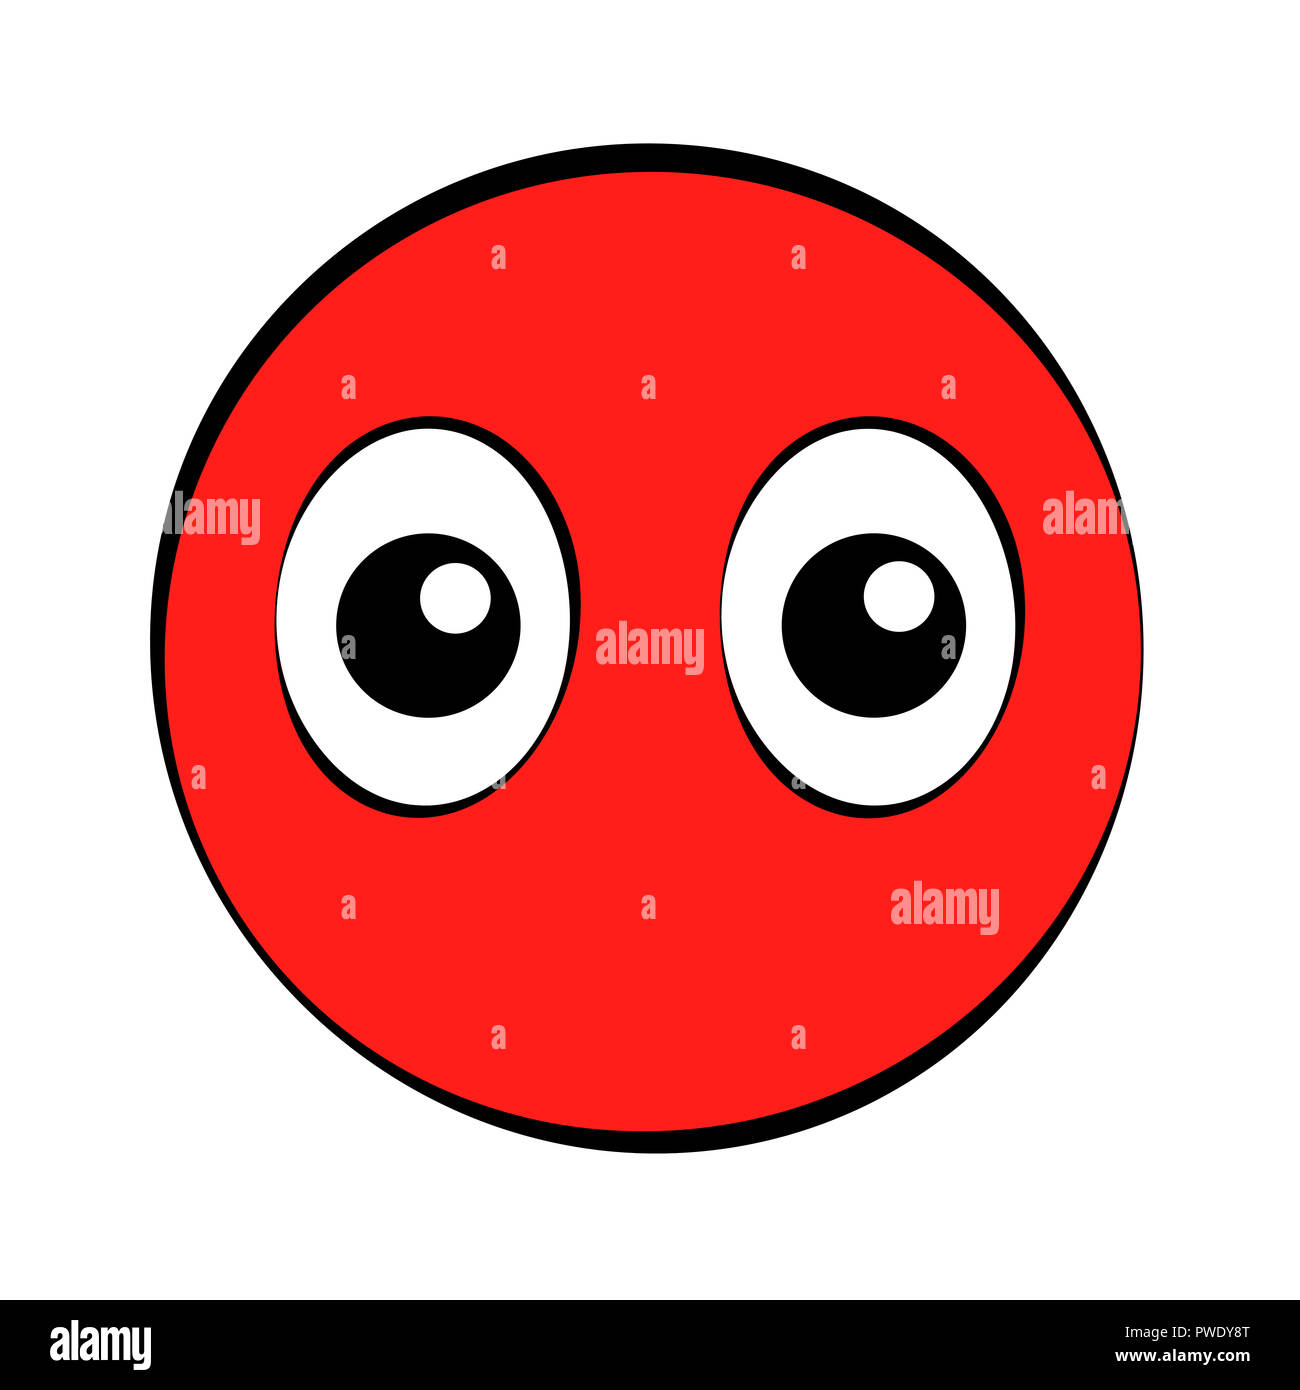 Round red comic face with big eyes. Simple illustration on white background. Stock Photo